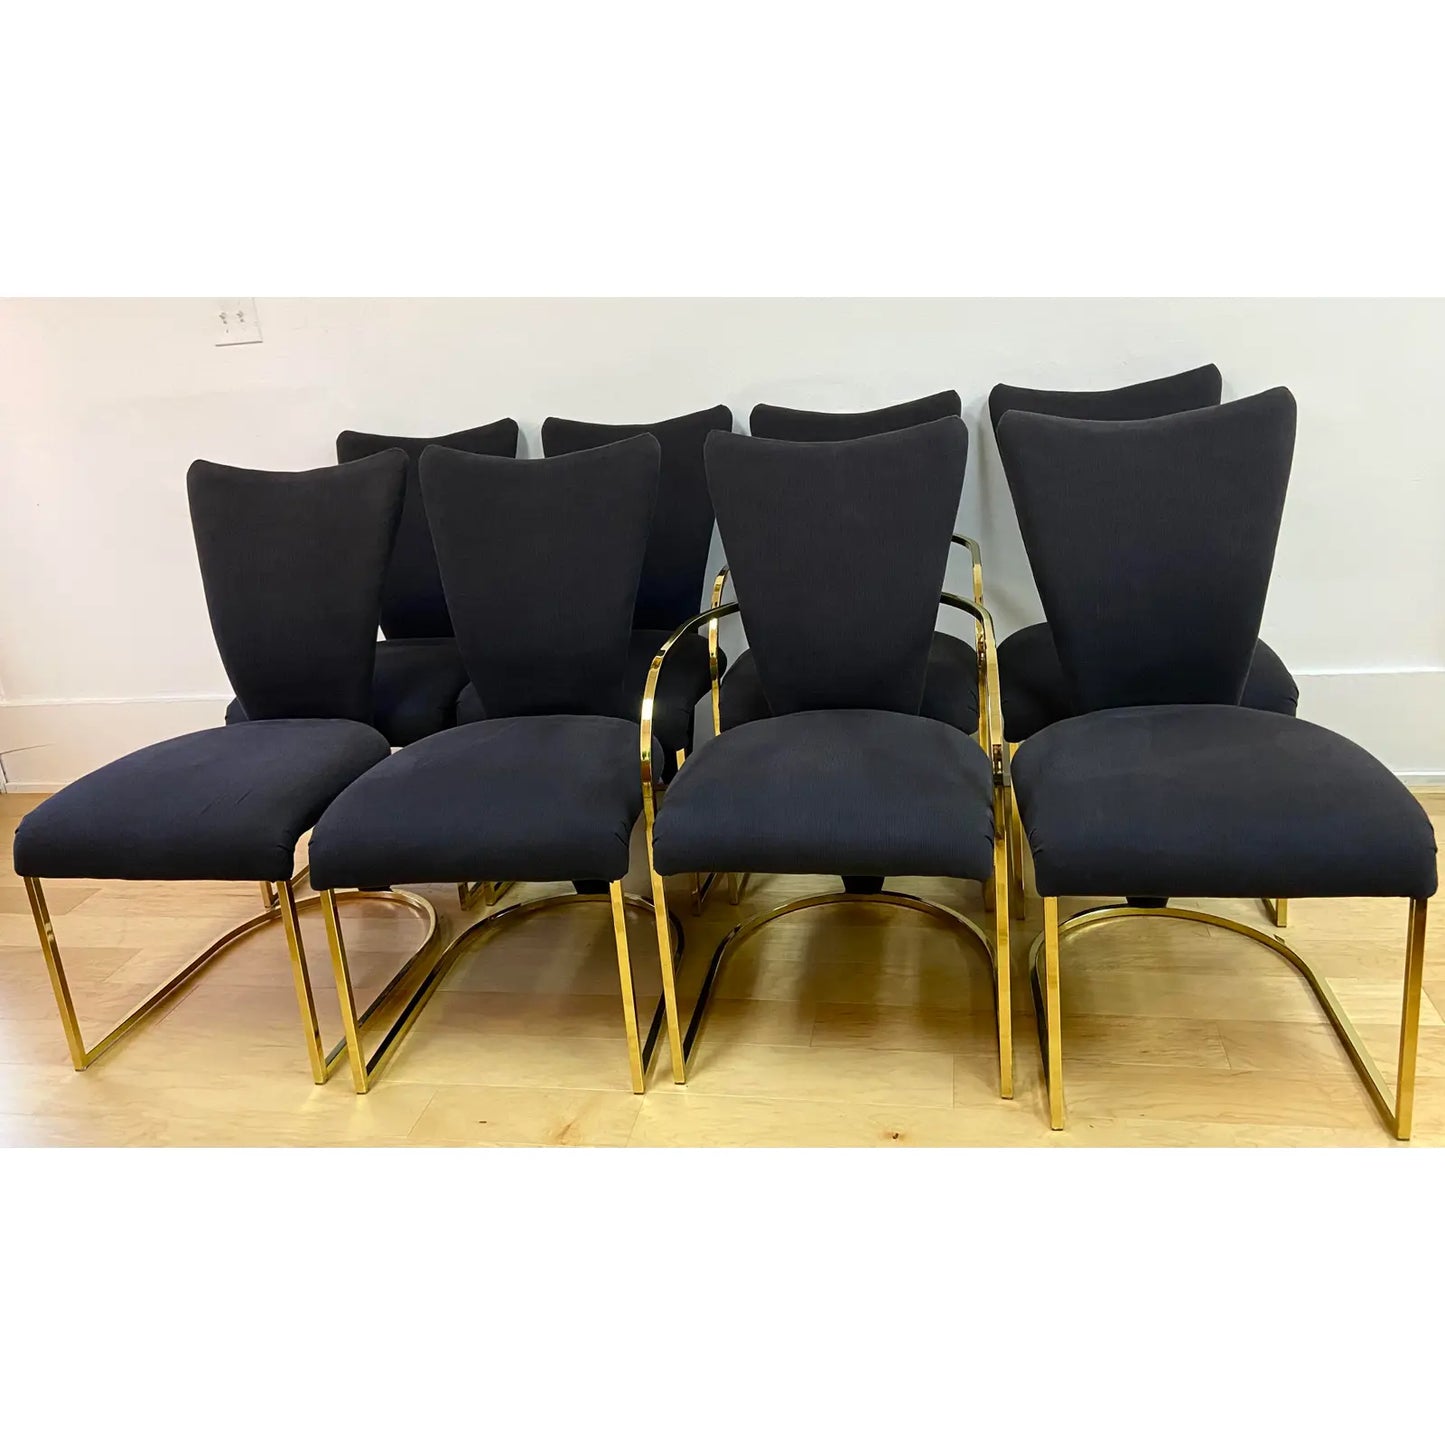 SET OF 8 DINING CHAIRS BY DESIGN INSTITUTE OF AMERICA